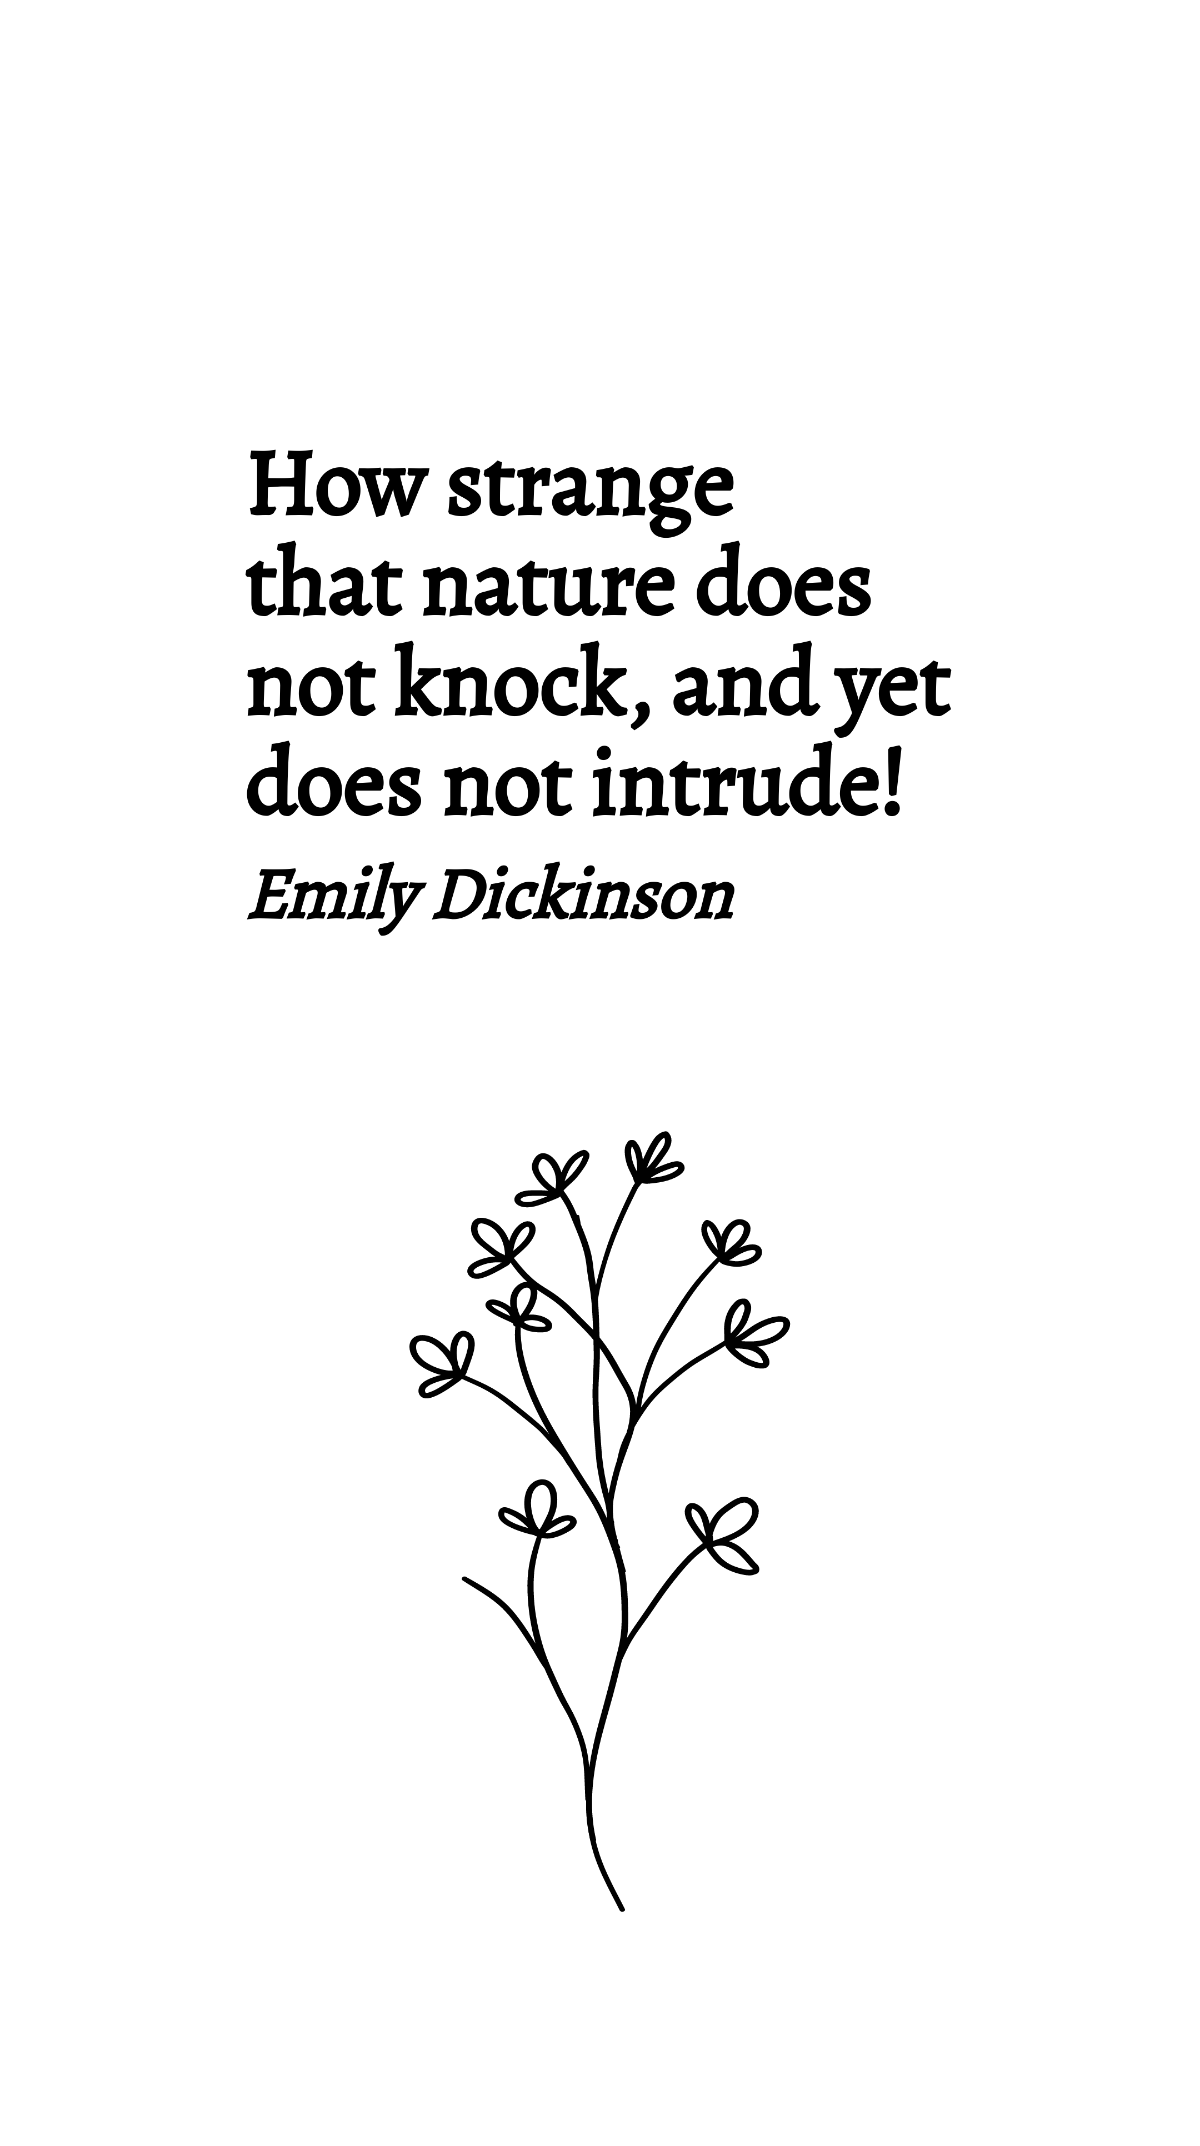 Emily Dickinson - How strange that nature does not knock, and yet does not intrude! Template